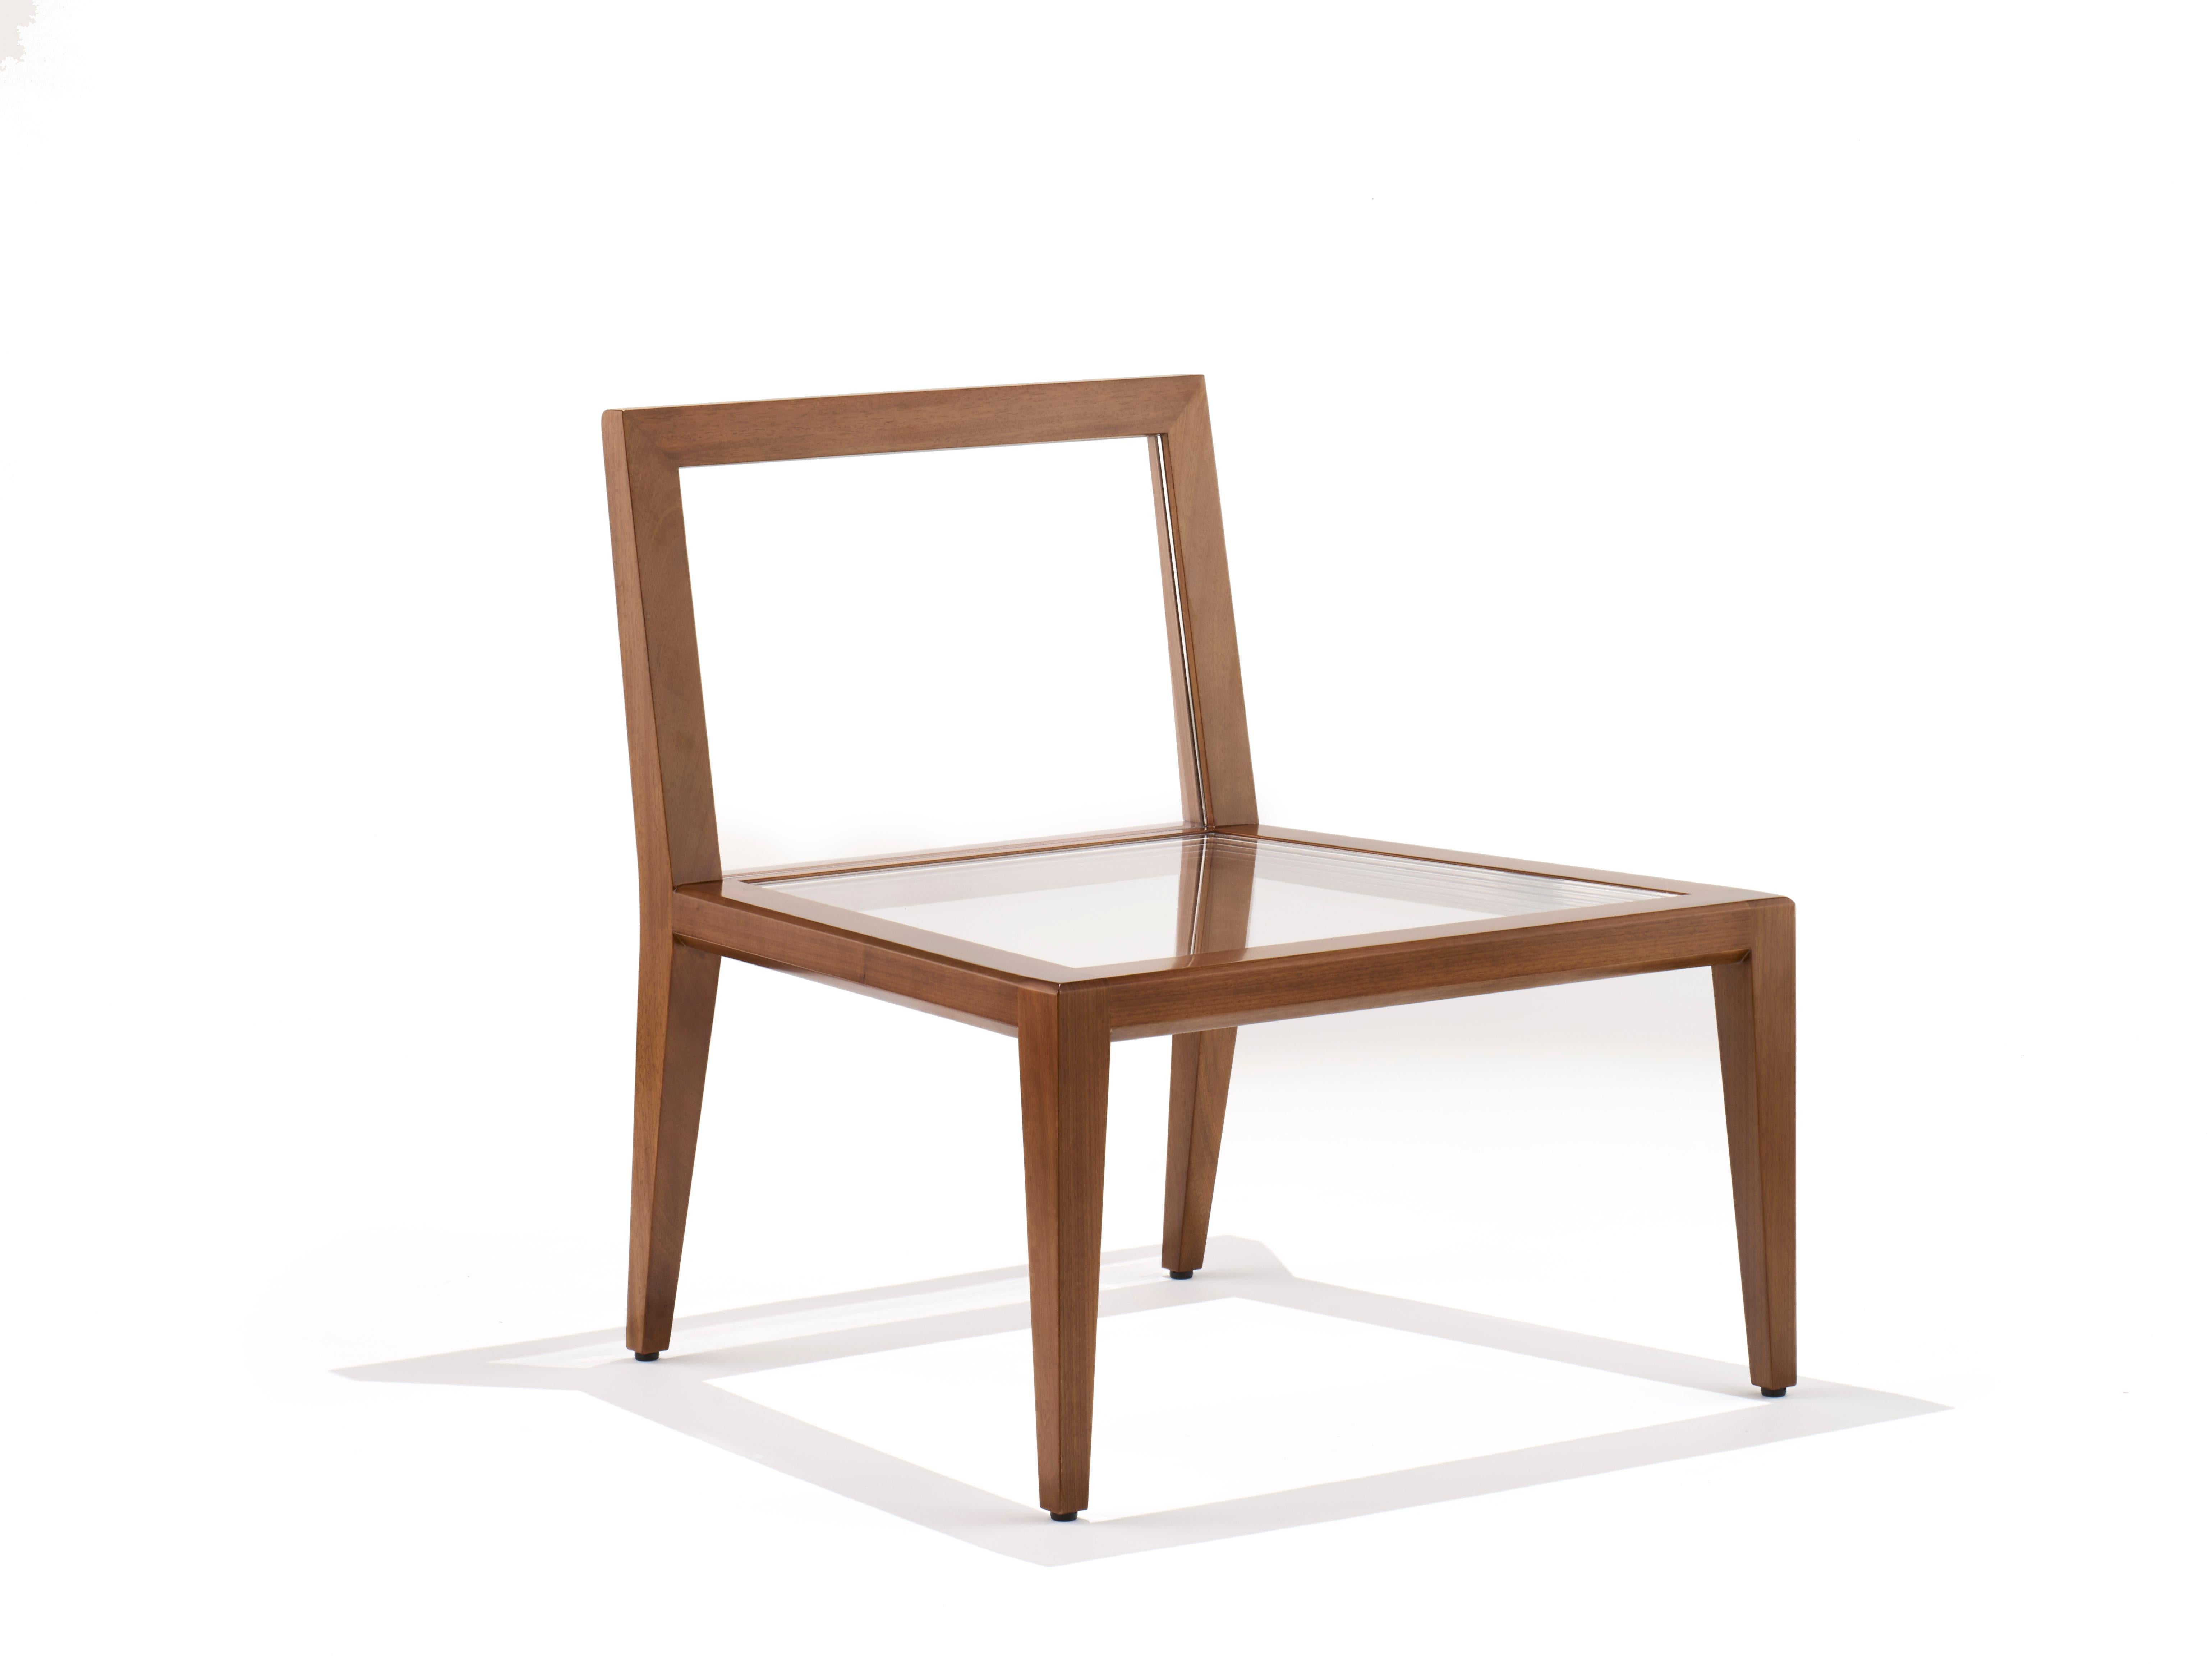 The wood float chair blurs the lines between art and furniture and encourages an internal dialogue with the viewer. Is this art or can I sit on it? Both. Handcrafted from solid walnut, the frame is elegantly structured and supported by a transparent